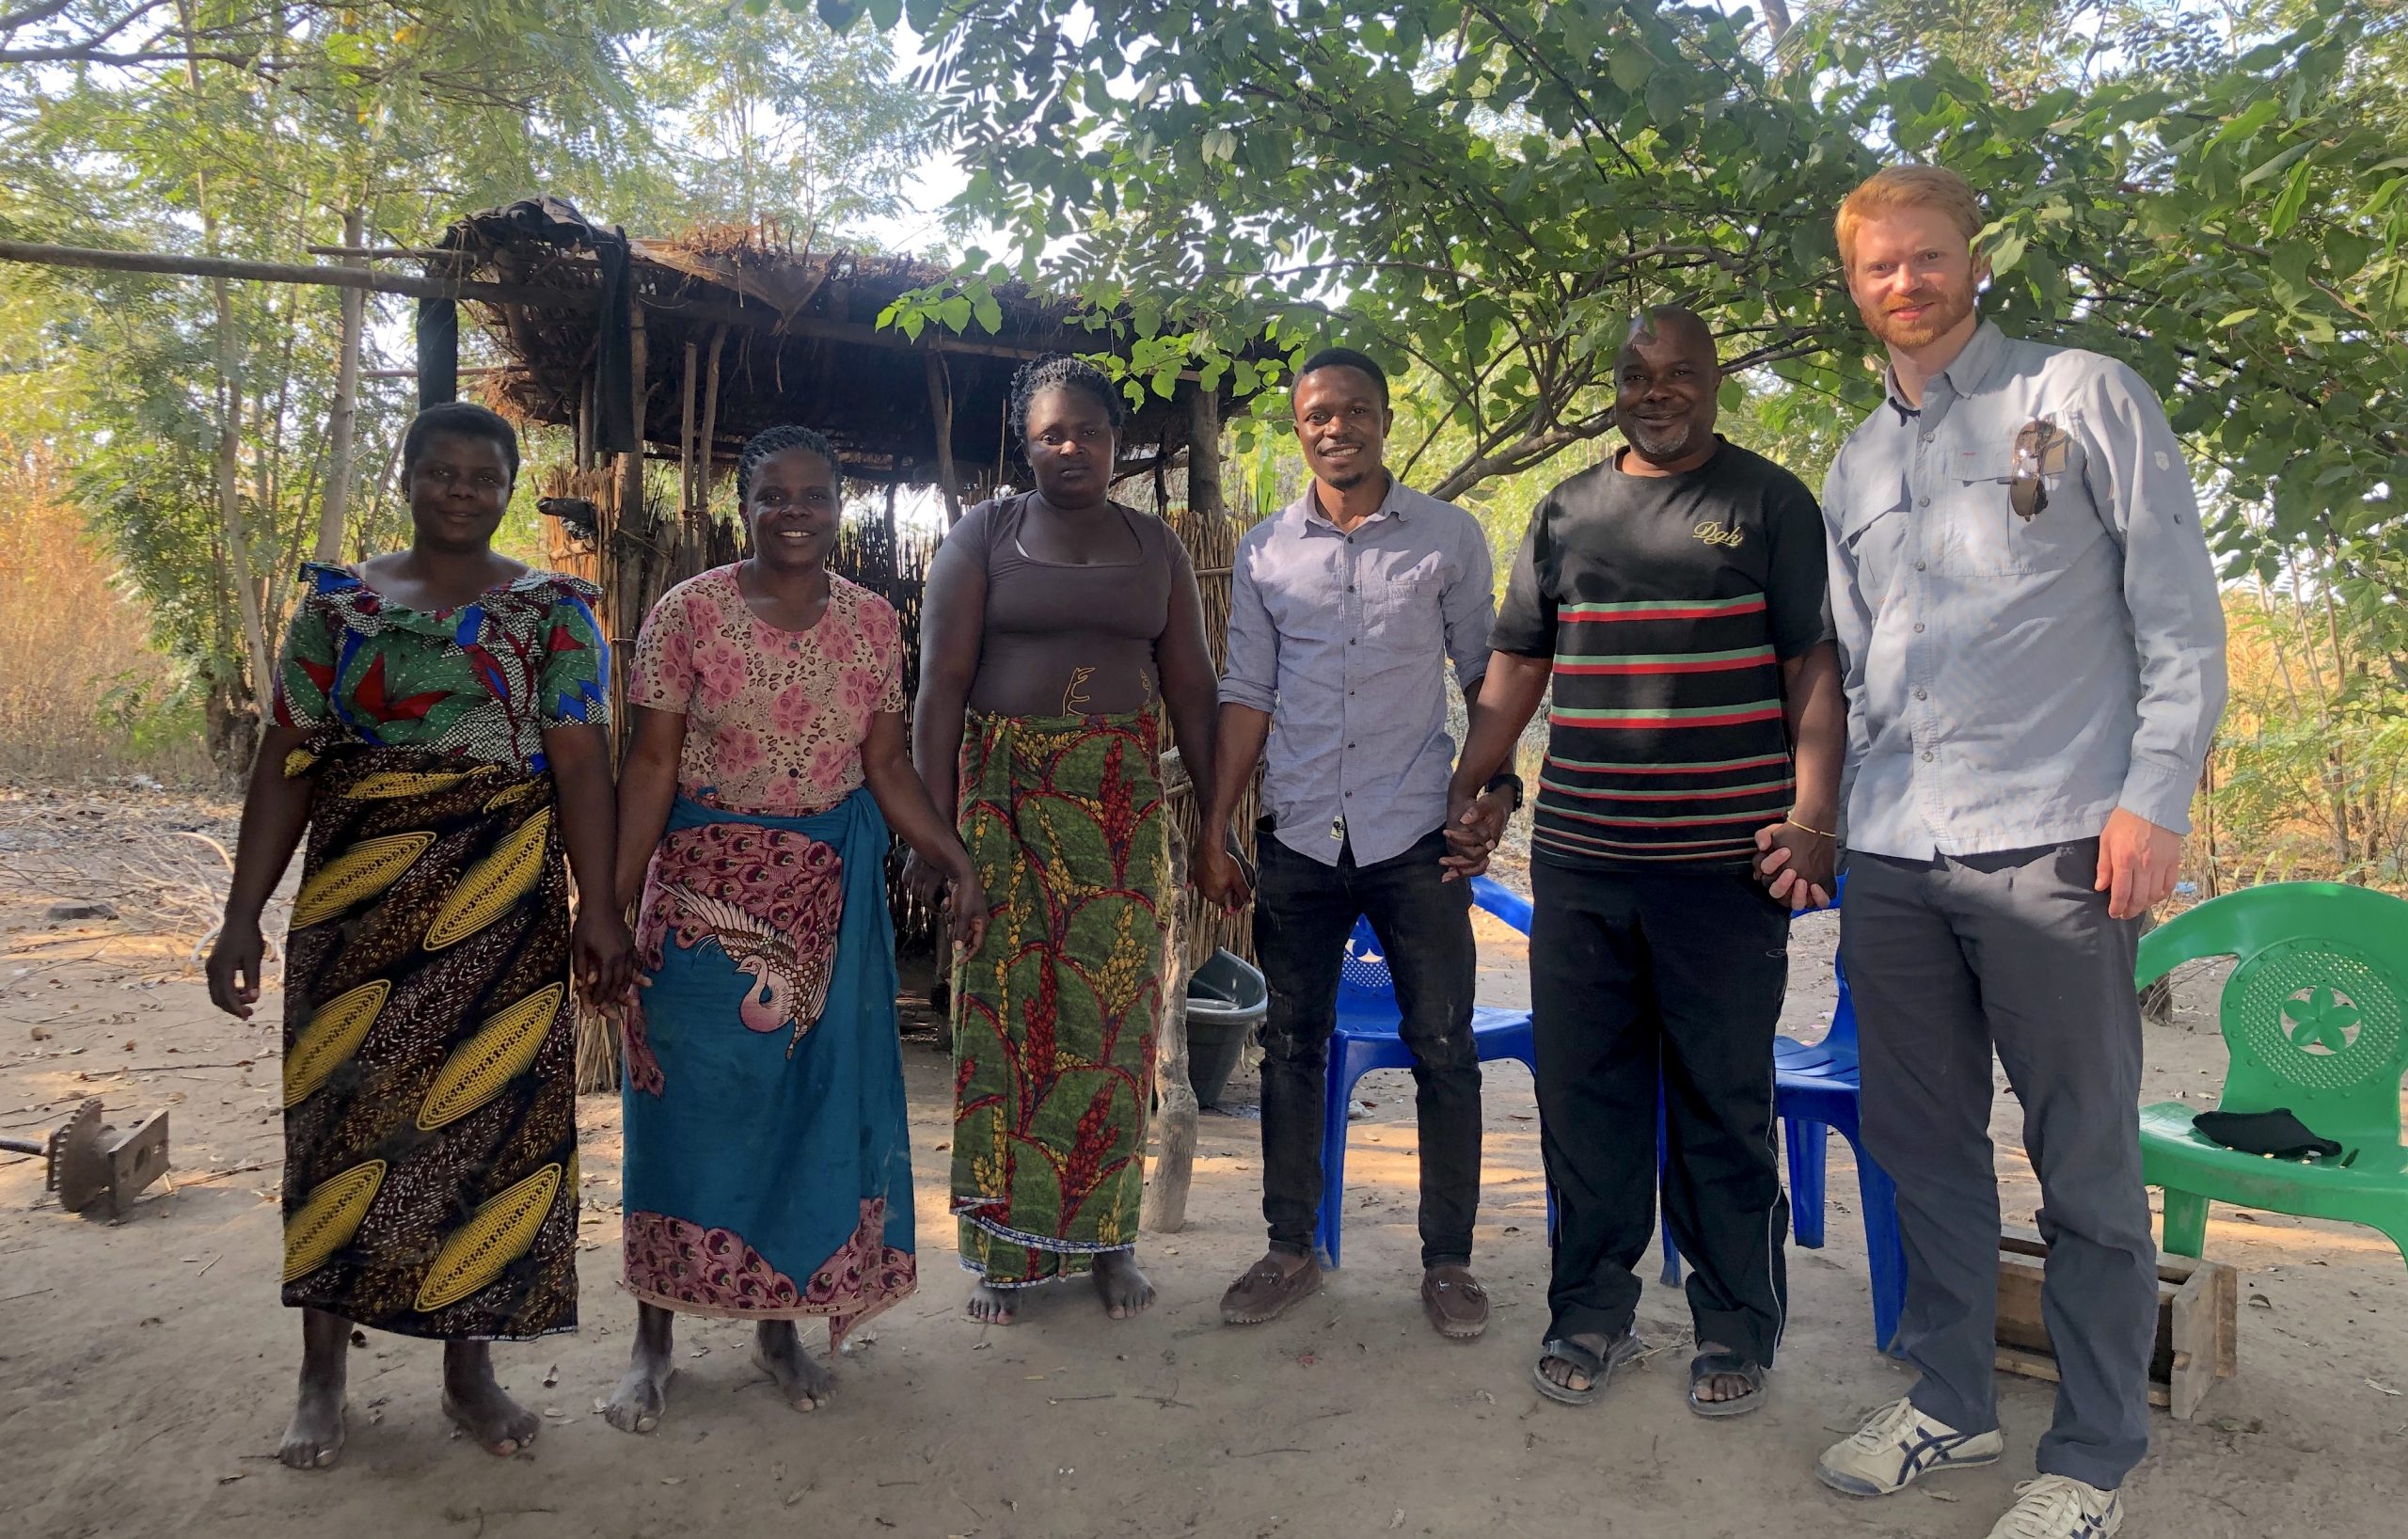 Three of the 11 members of the Yankho women's co-op (left), the backbone of and inspiration for Umodzi, along with Brian Ndongera (third from right), an advisor to Umodzi, Mathews Tisatayane (second from right), founder and president, and Sean Mandell, co-founder and CEO. (Umodzi photo)